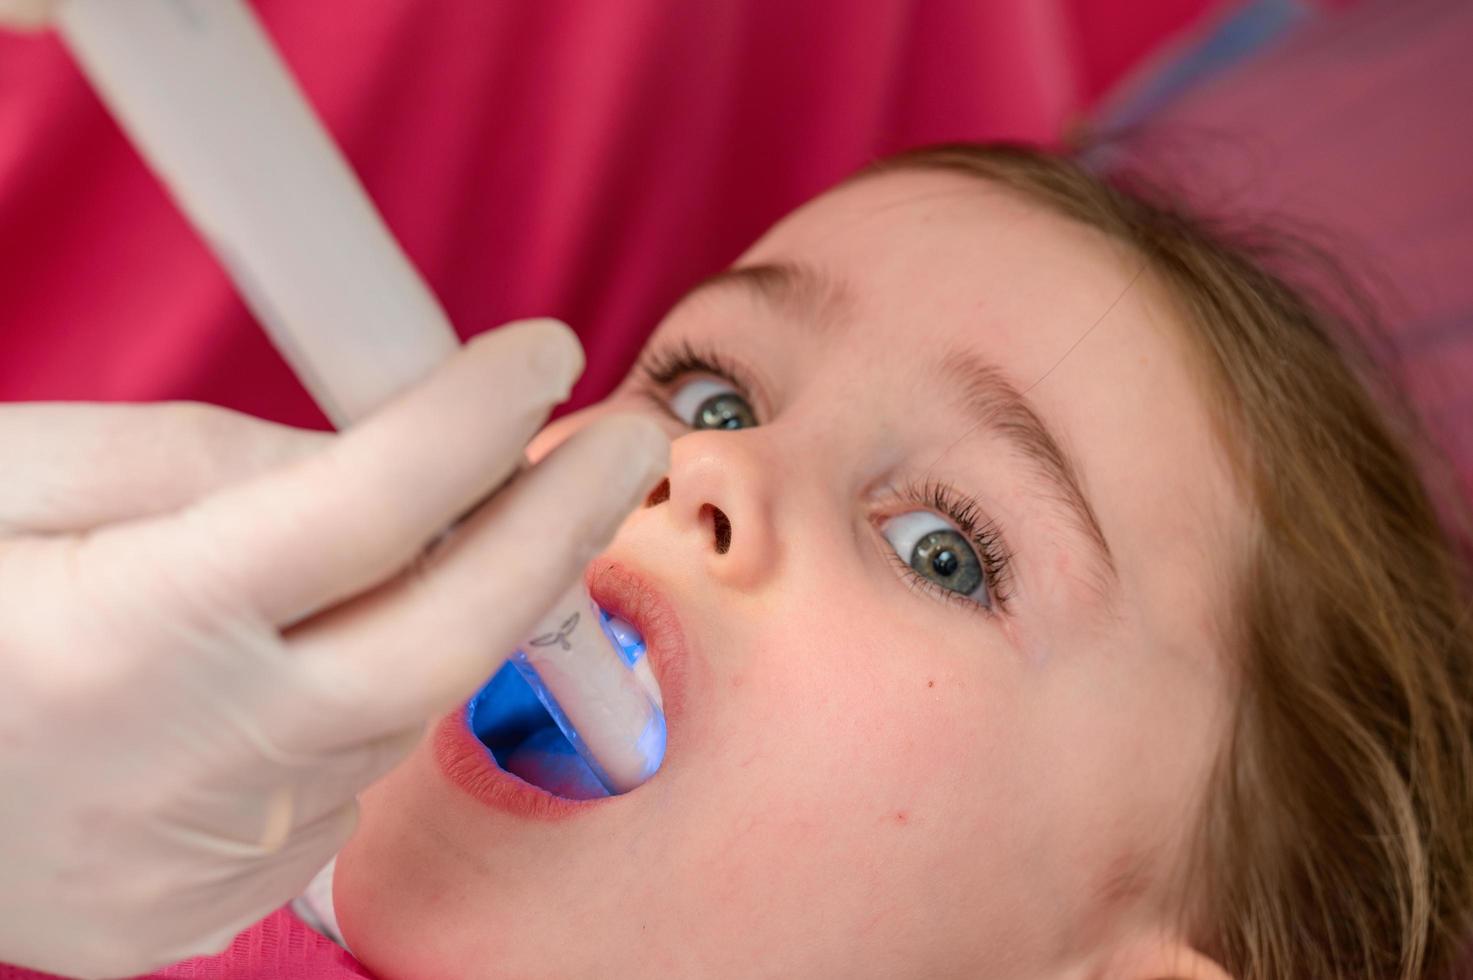 Ultraviolet light in dentistry, the dentist holds a device with ultraviolet light to quickly seal the filling in the child's tooth. photo